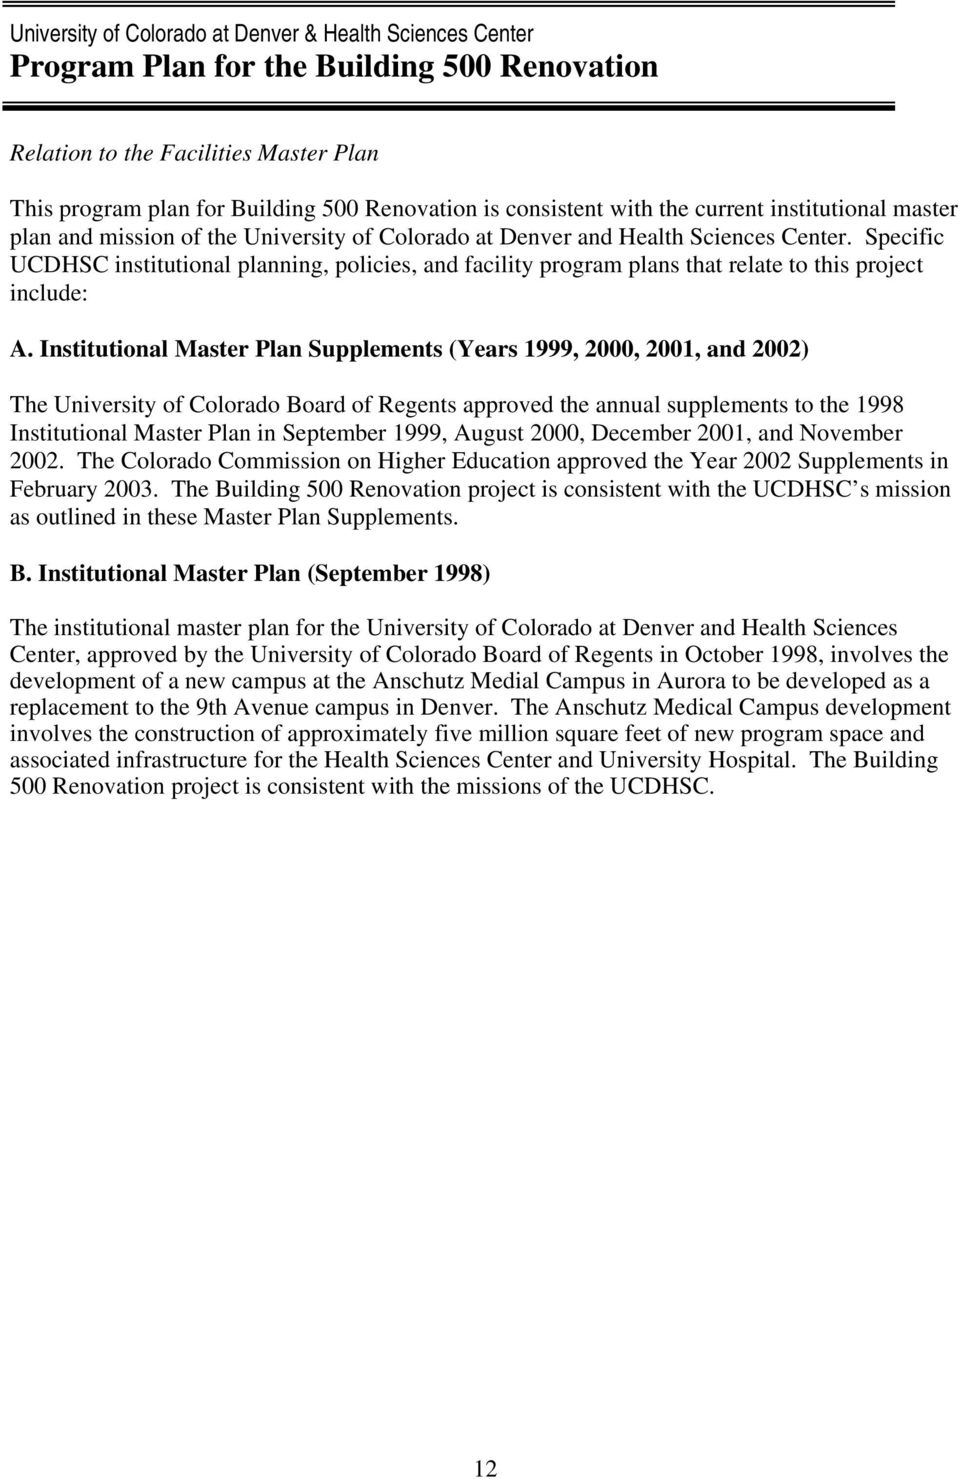 Institutional Master Plan Supplements (Years 1999, 2000, 2001, and 2002) The University of Colorado Board of Regents approved the annual supplements to the 1998 Institutional Master Plan in September